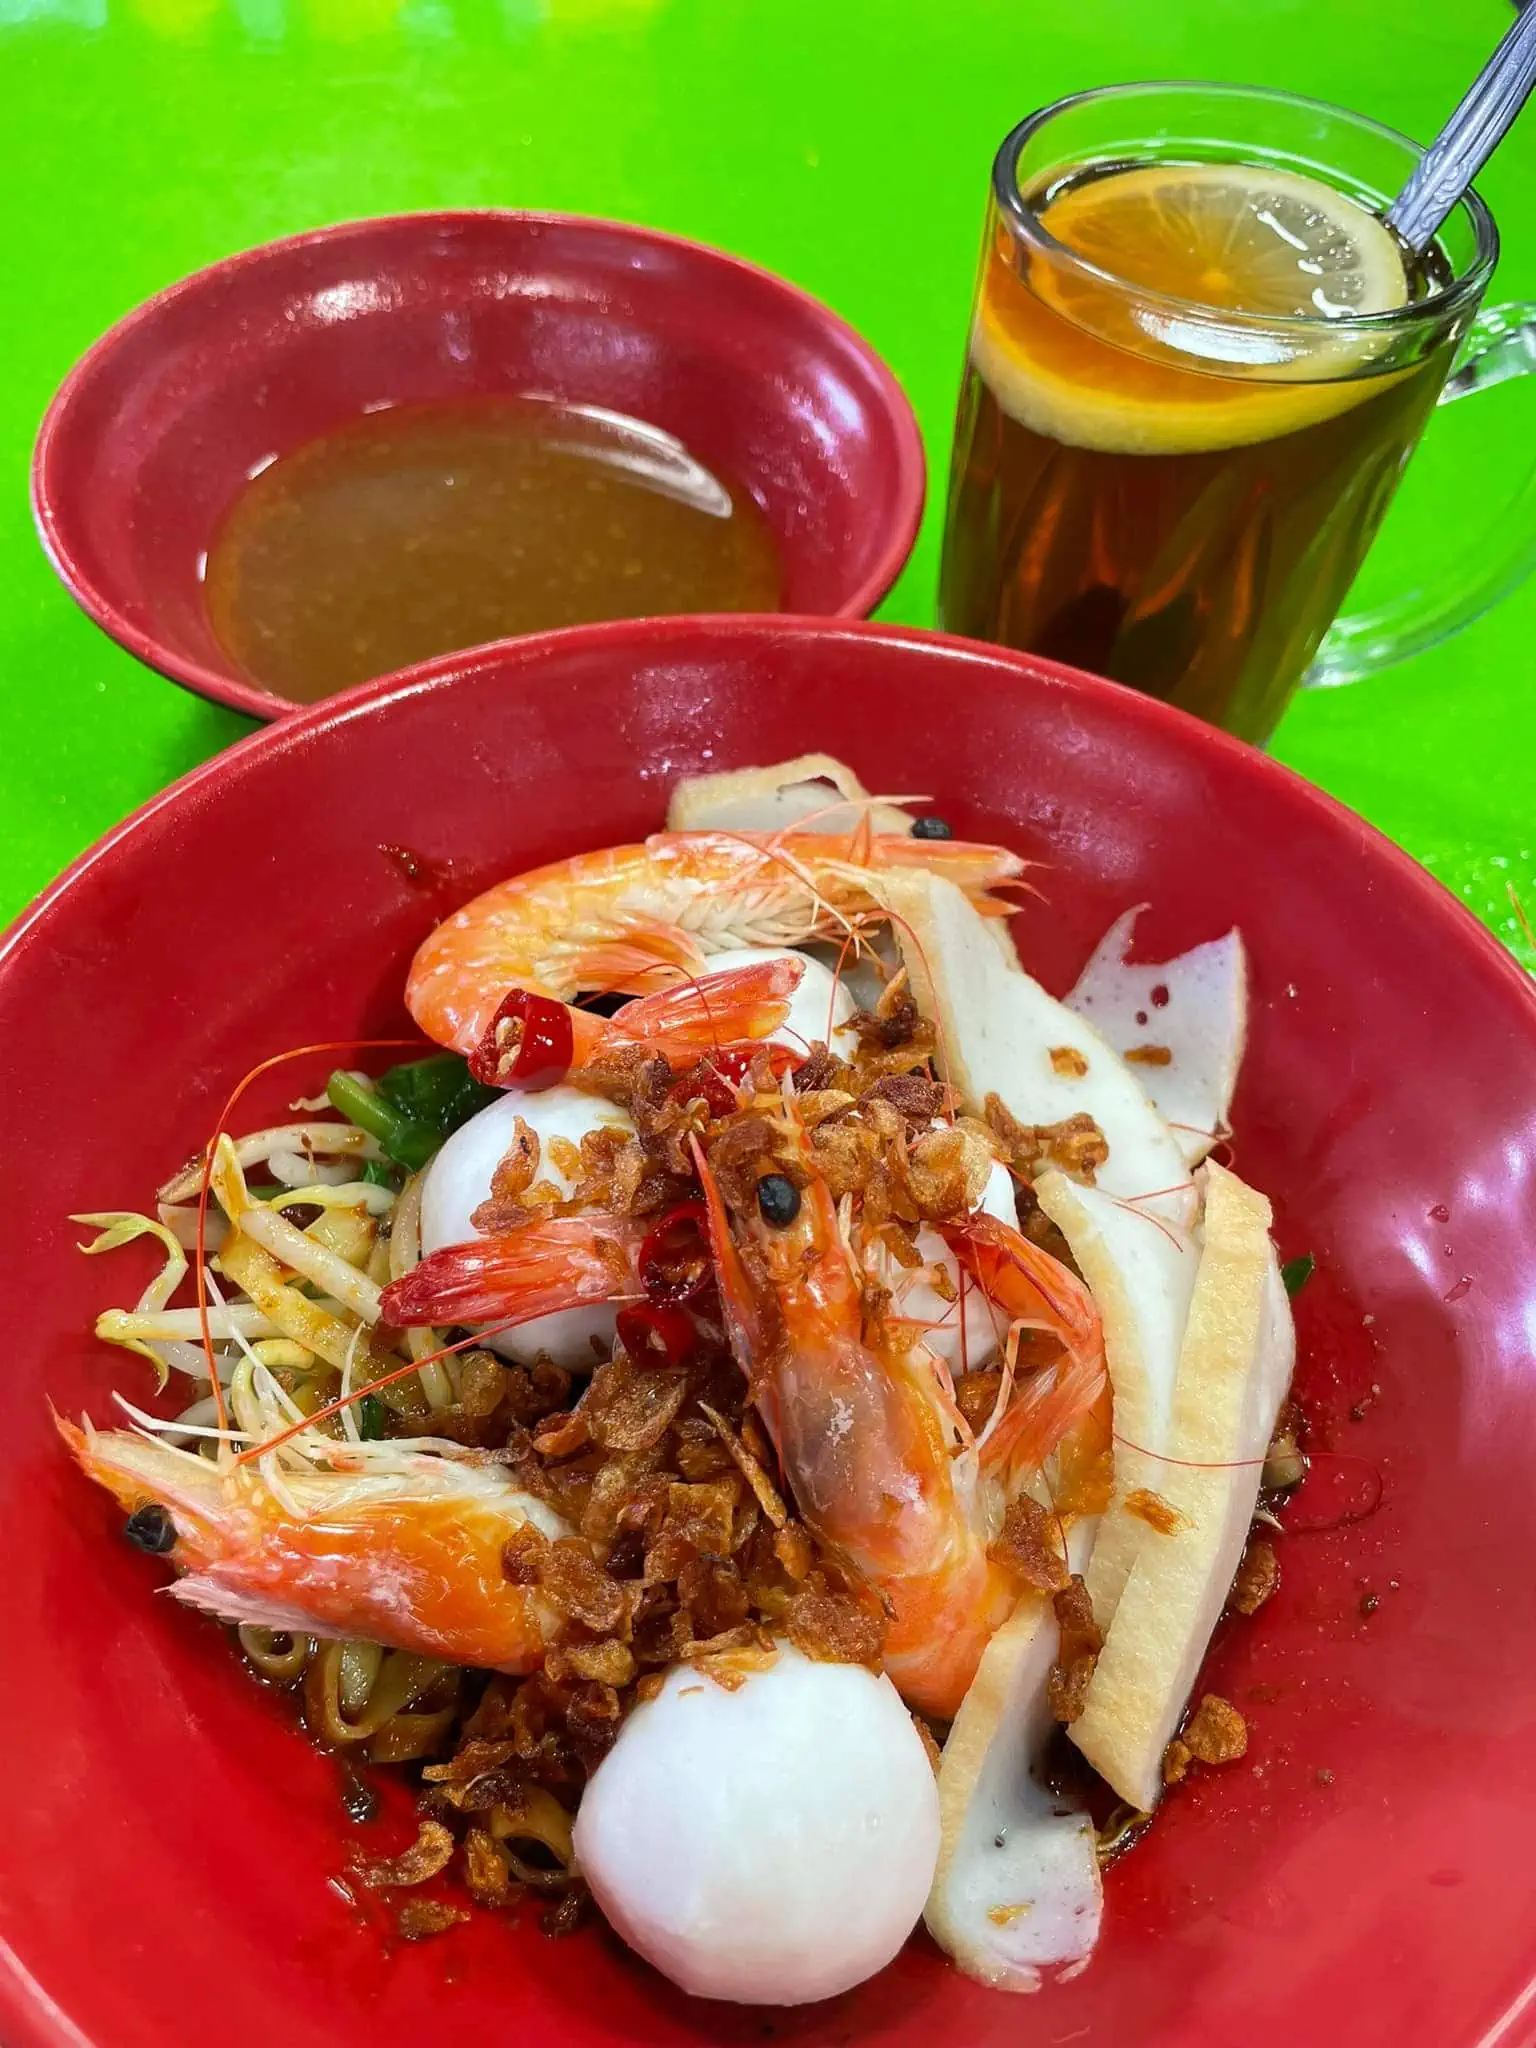 This halal noodle store in Jurong East is giving out free prawn noodles throughout the month of Ramadan, no questions asked